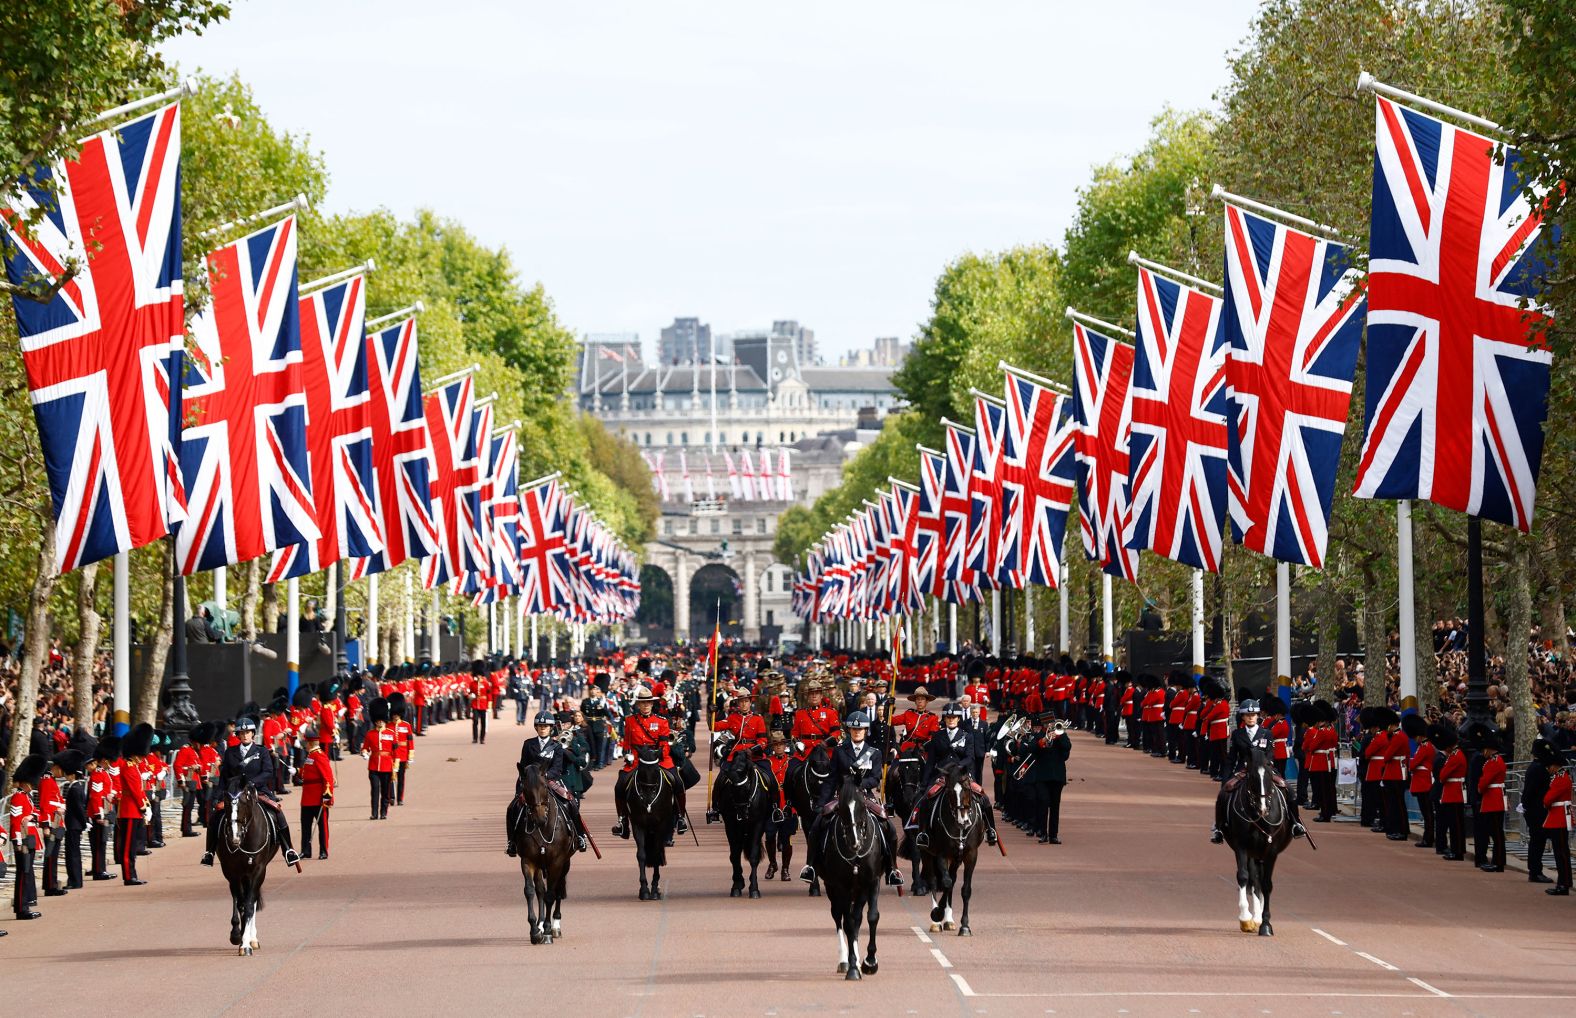 The Queen's funeral procession marches down The Mall after the service at Westminster Abbey.